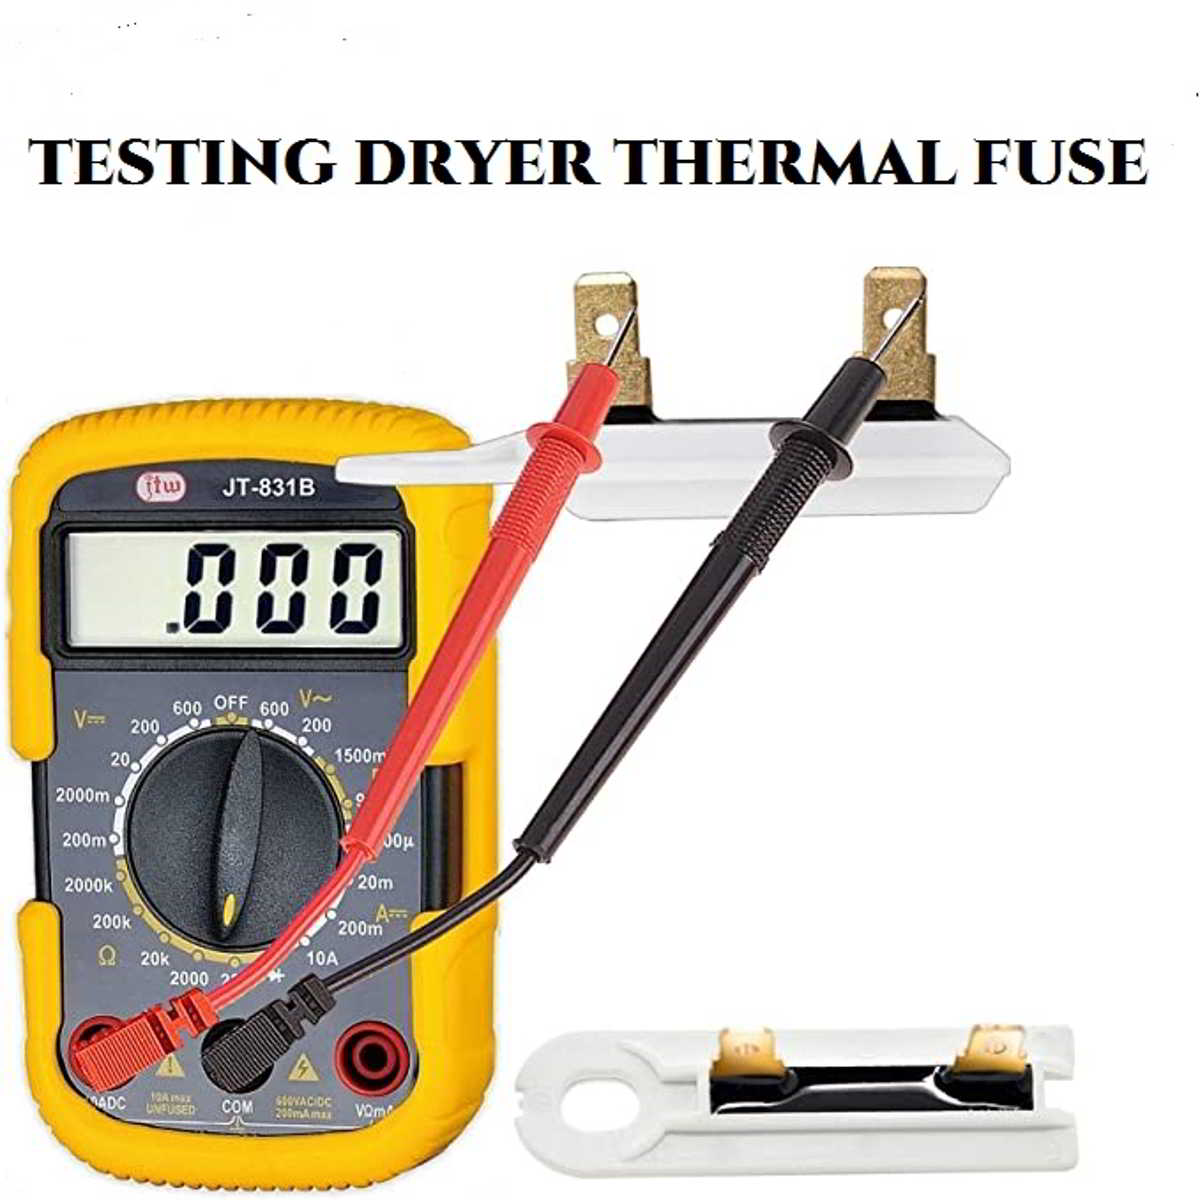 How to test thermal fuse on dryers